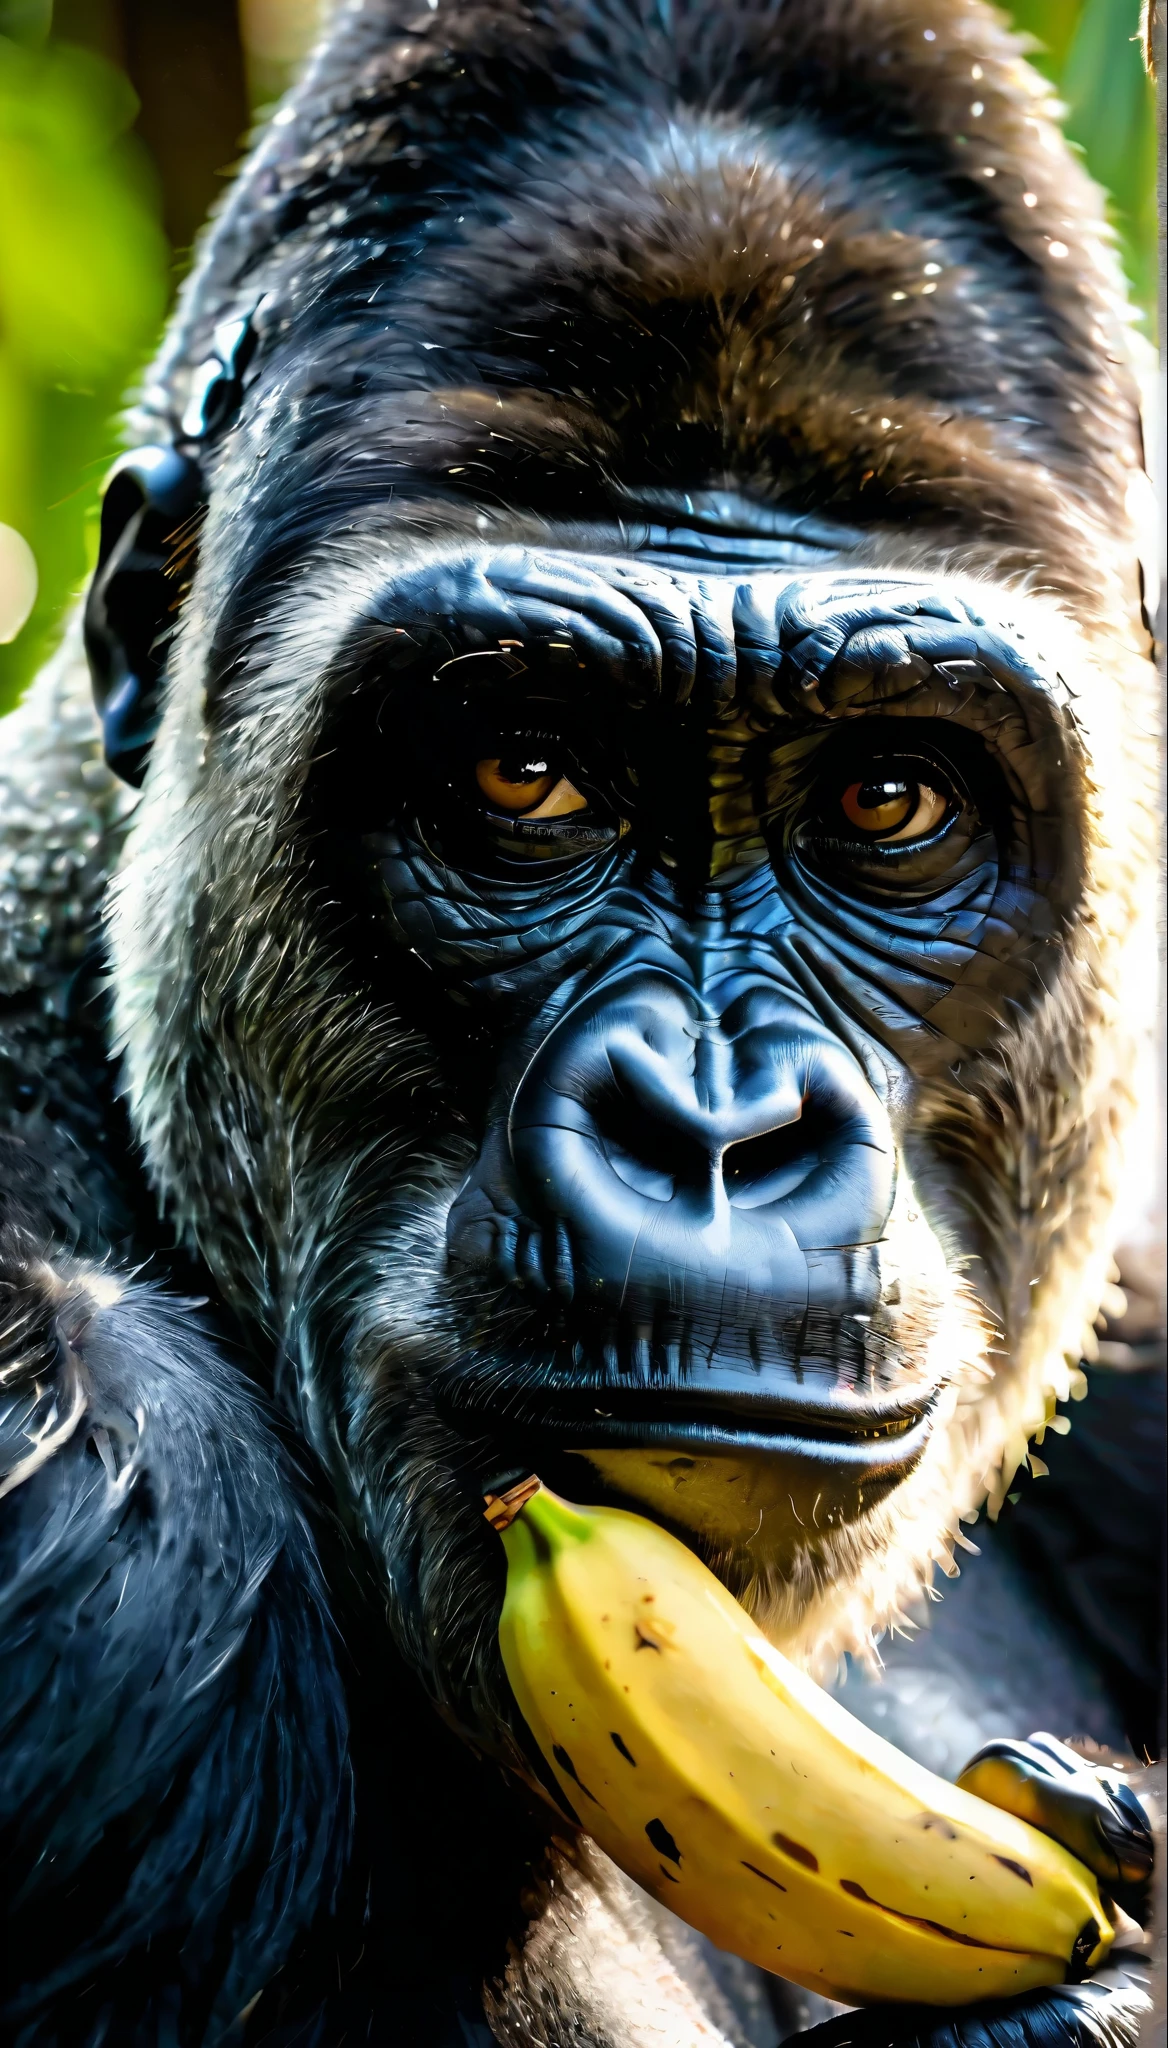 (best quality,highres,ultra-detailed),medium close-up of an African gorilla's,[bored](bored:0.9) expression, [holding](holding:1.1) a banana in one hand, [watching](watching:1.1) an animal photographer with curiosity, [realistic](realistic:1.37) facial features and texture, [intense](intense:1.1) gaze from the gorilla's eyes, [sunlight](sunlight:1.1) casting [dramatic](dramatic:1.1) shadows, [vivid](vivid:1.1) colors highlighting the gorilla's fur, [bokeh](bokeh:1.1) background adding depth to the image, [natural](natural:1.1) lighting capturing the raw beauty of the moment, [details](details:1.1) of the gorilla's facial expressions and [muscular](muscular:1.1) physique.